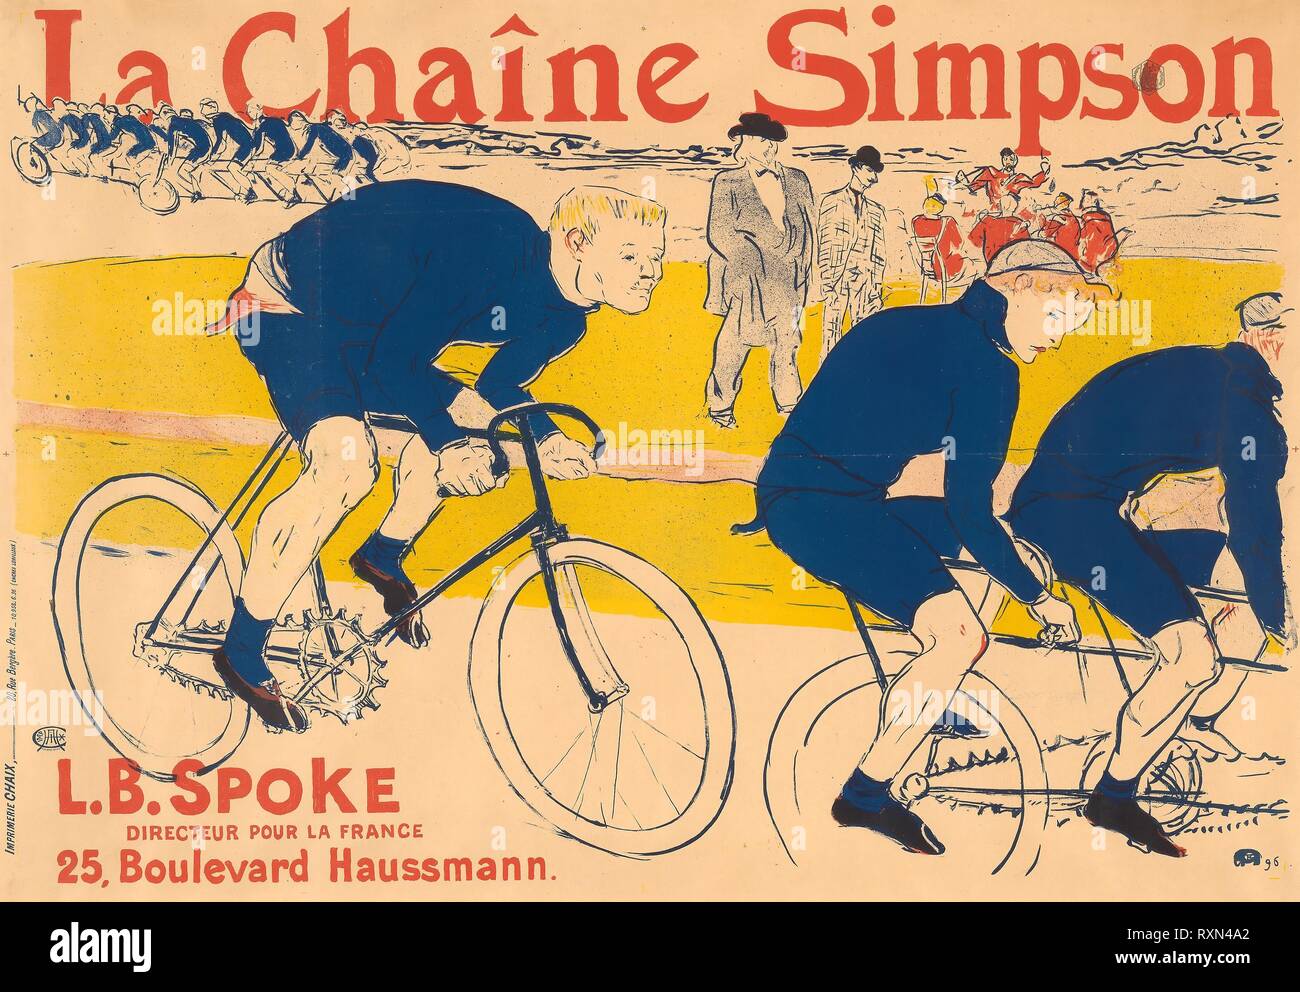 The Simpson Chain. Henri de Toulouse-Lautrec; French, 1864-1901. Date: 1896. Dimensions: 815 × 1,190 mm (image); 852 × 1,230 mm (sheet, sight). Color brush and spatter lithograph (poster) on tan wove paper with lettering by another hand. Origin: France. Museum: The Chicago Art Institute. Stock Photo